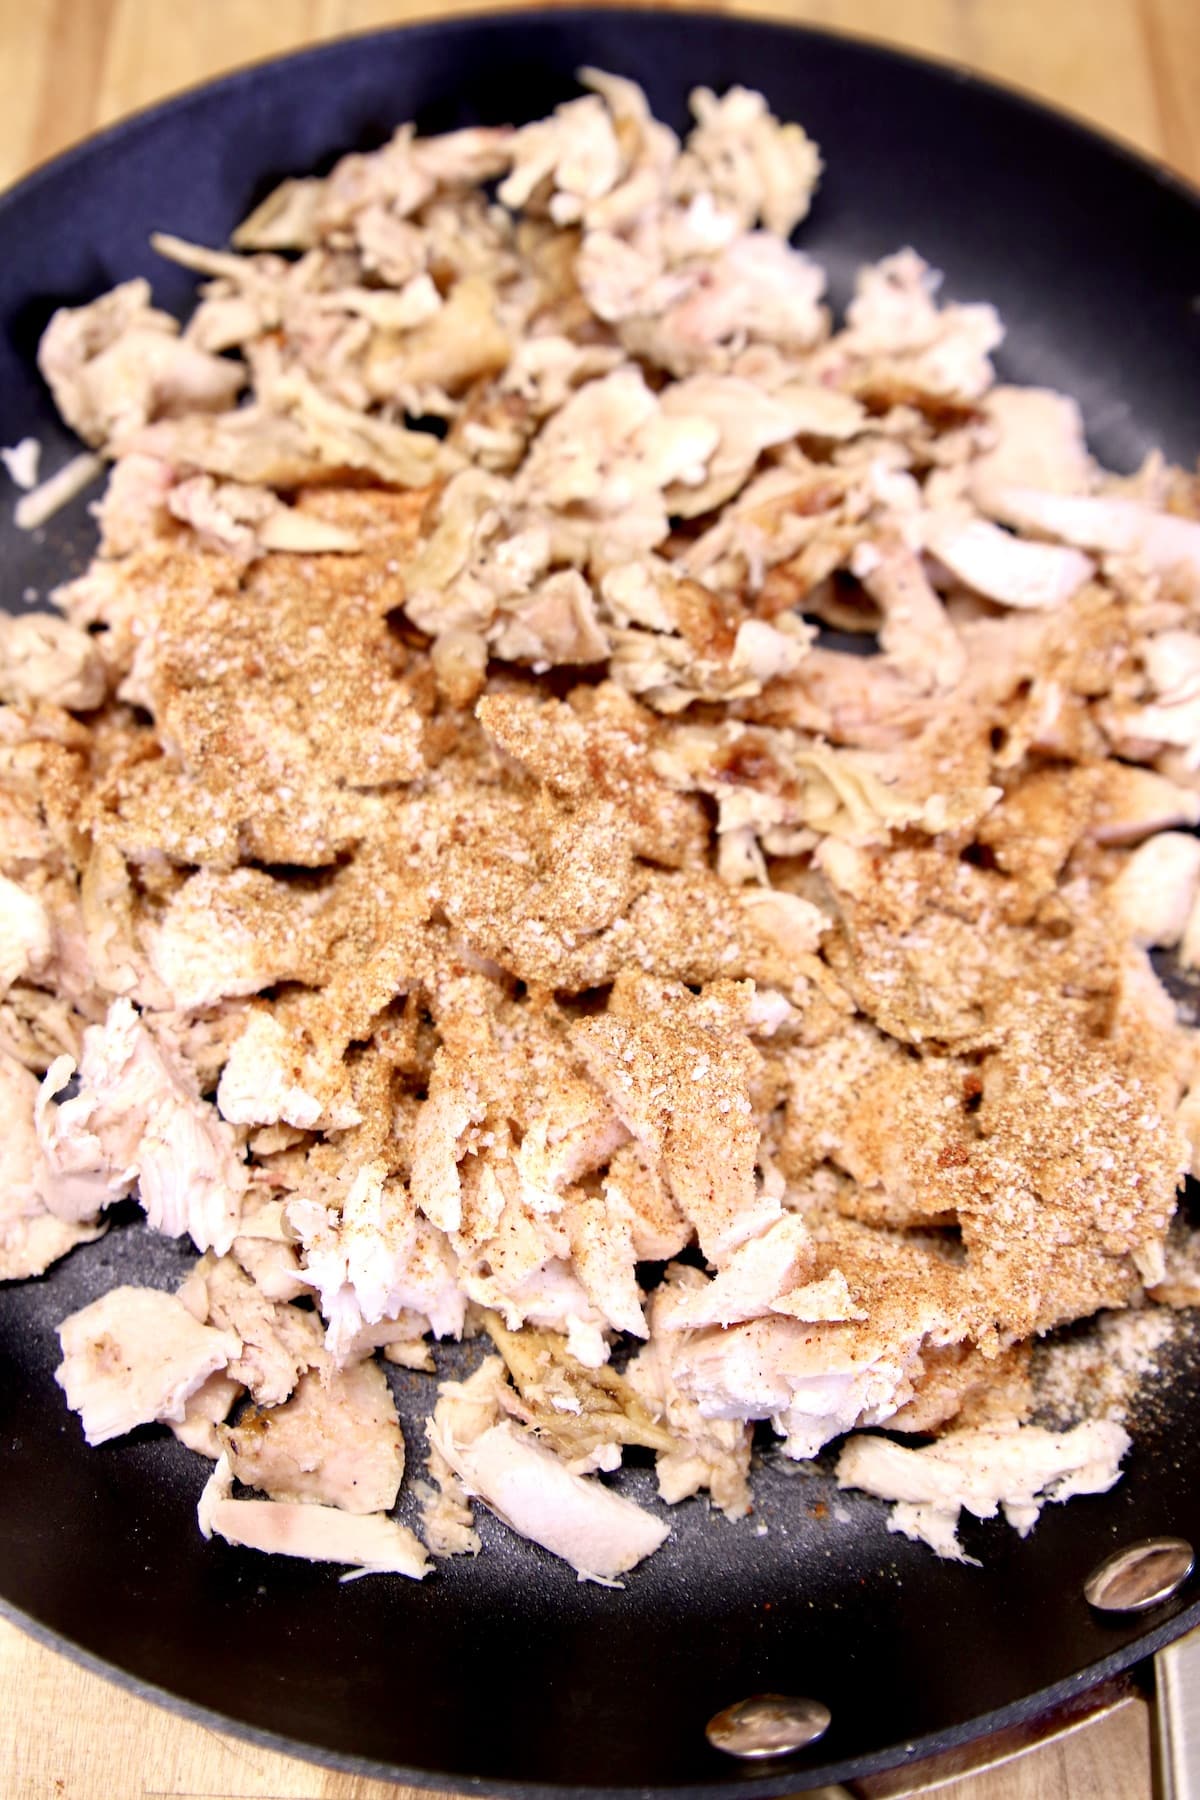 Skillet with shredded chicken and spices.